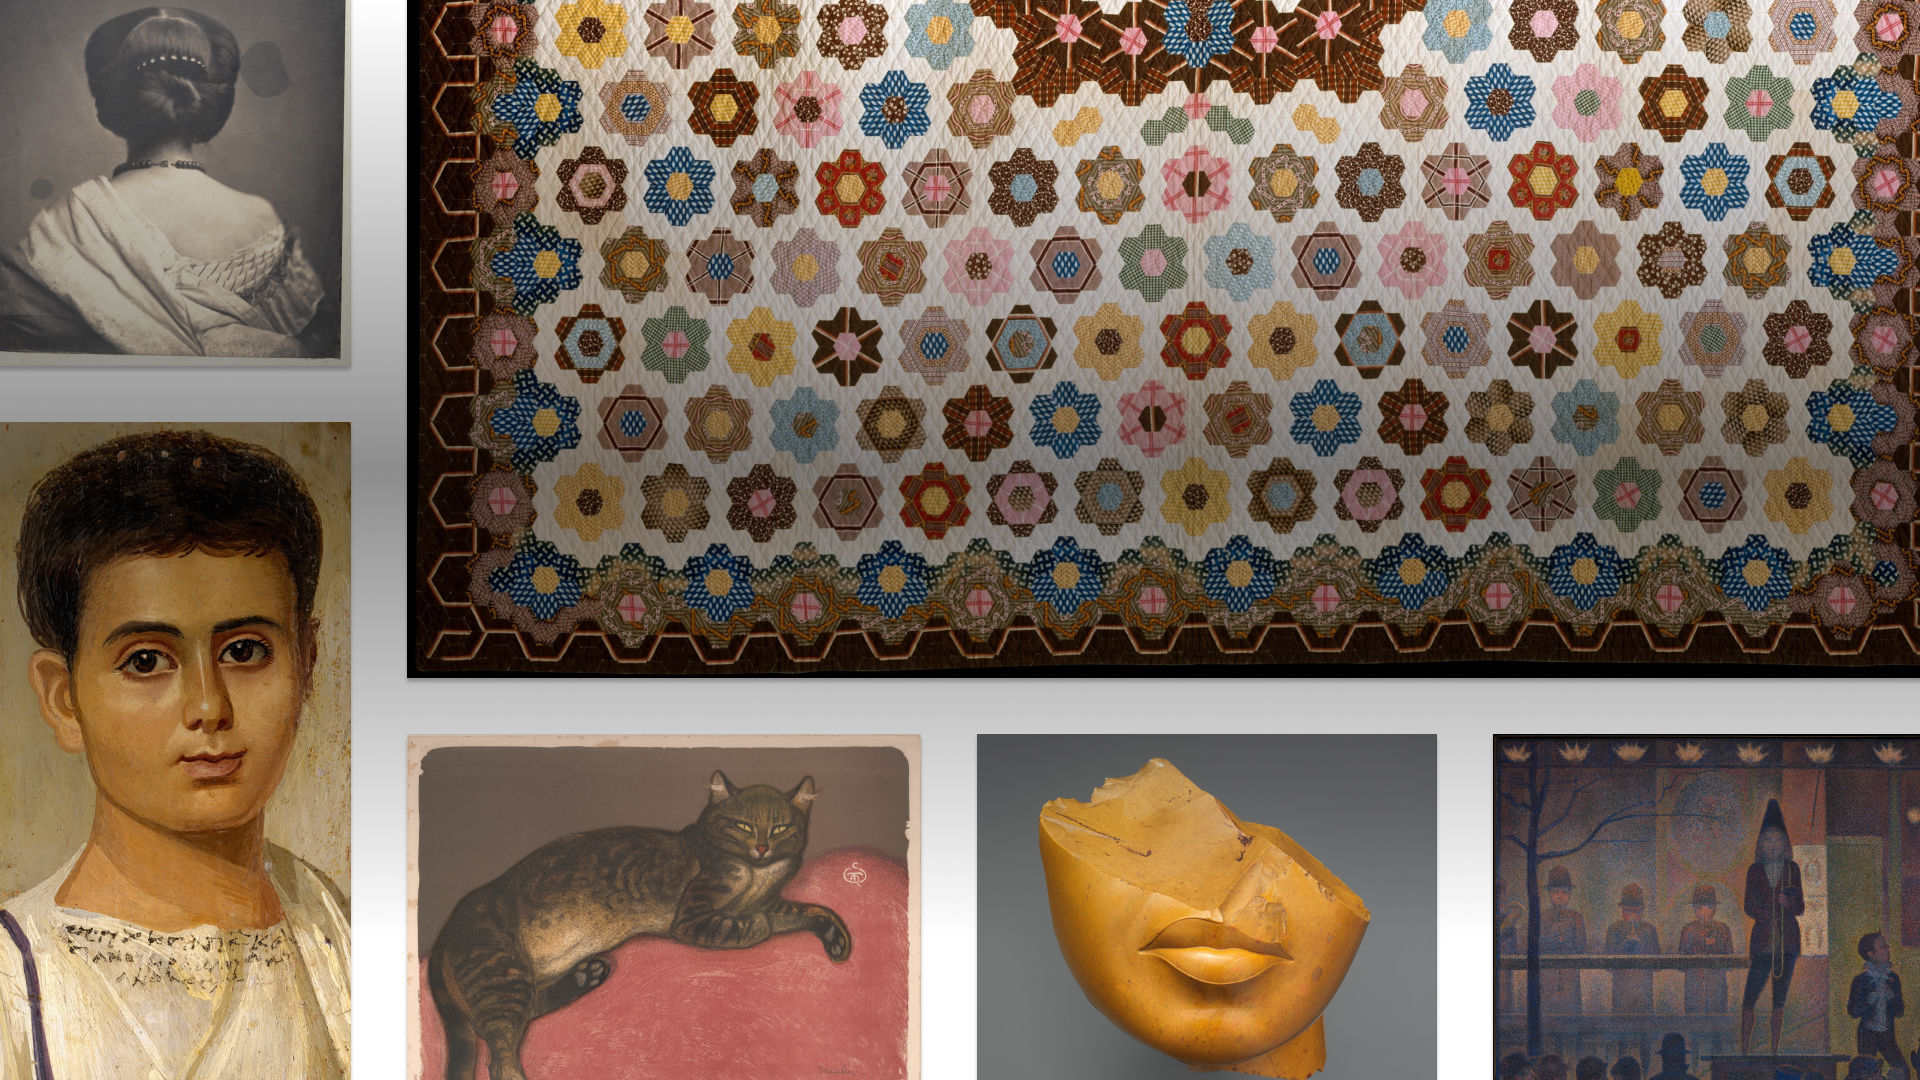 Composite image of several Open Access artworks including a honeycomb patterned quilt, a pointillist painting, an Egyptian head fragment, a cat illustration, and two portraits